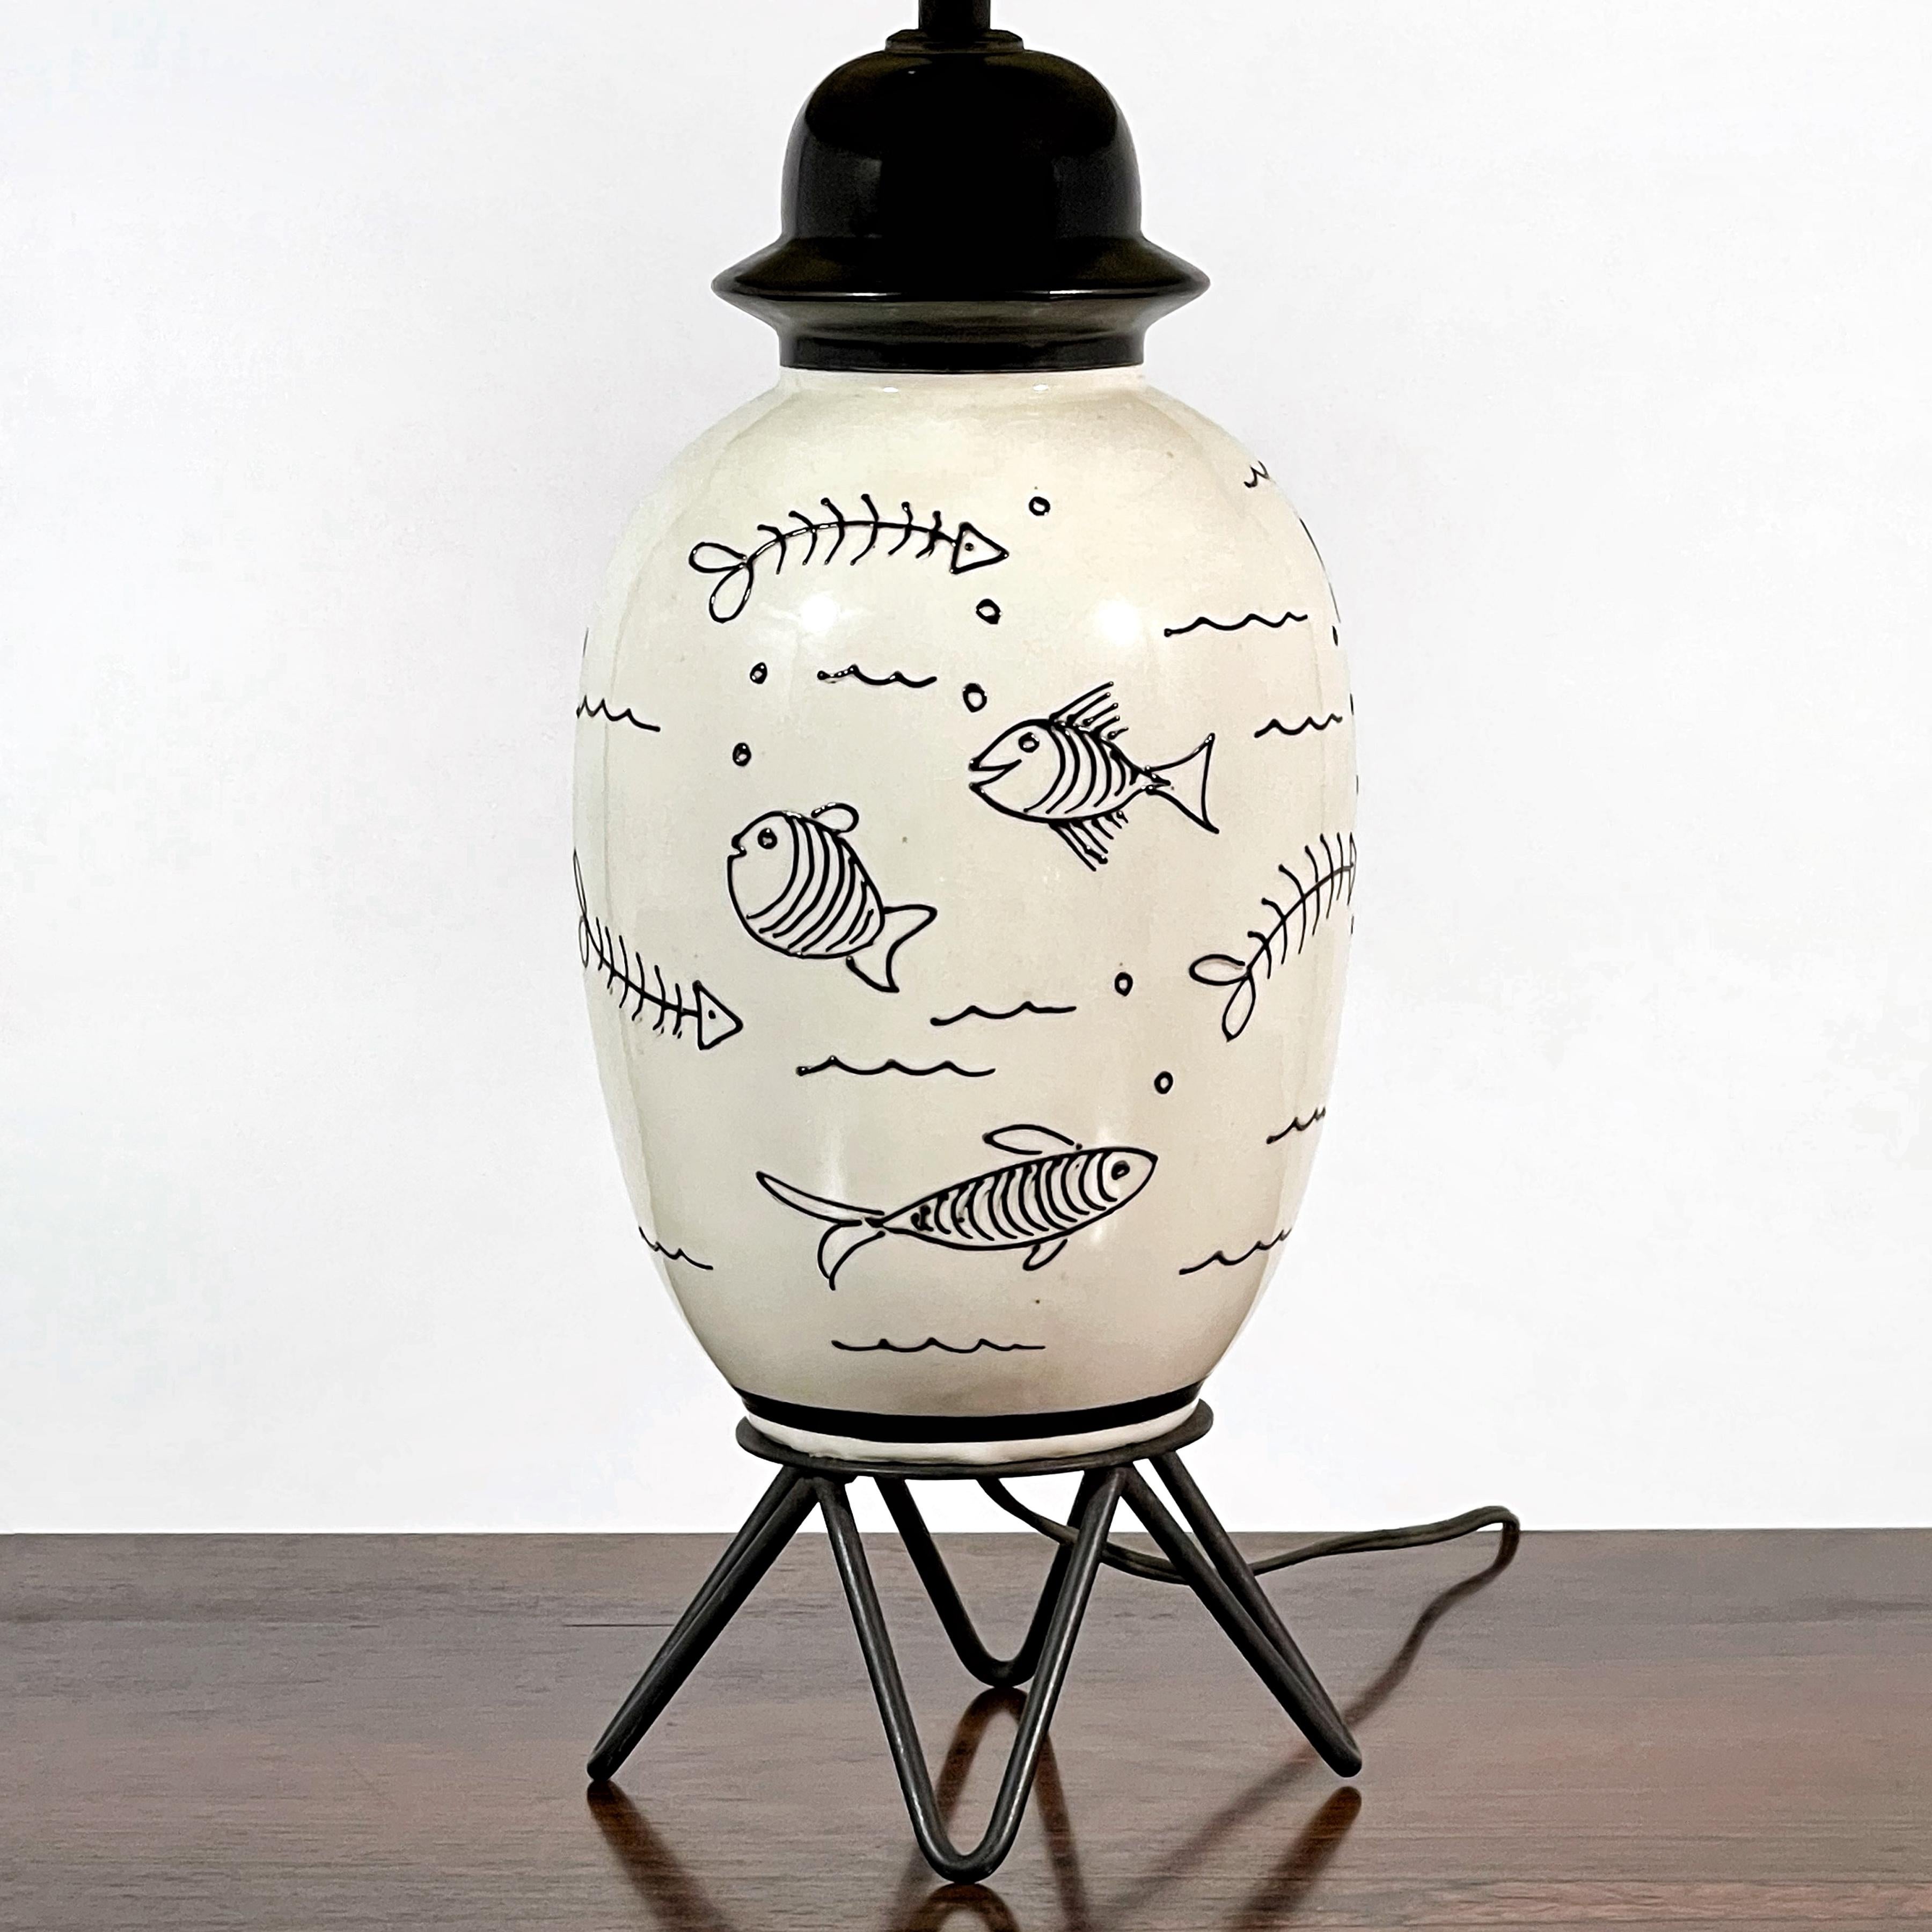 1950s Table Lamp with Whimsical Fish Design For Sale 3